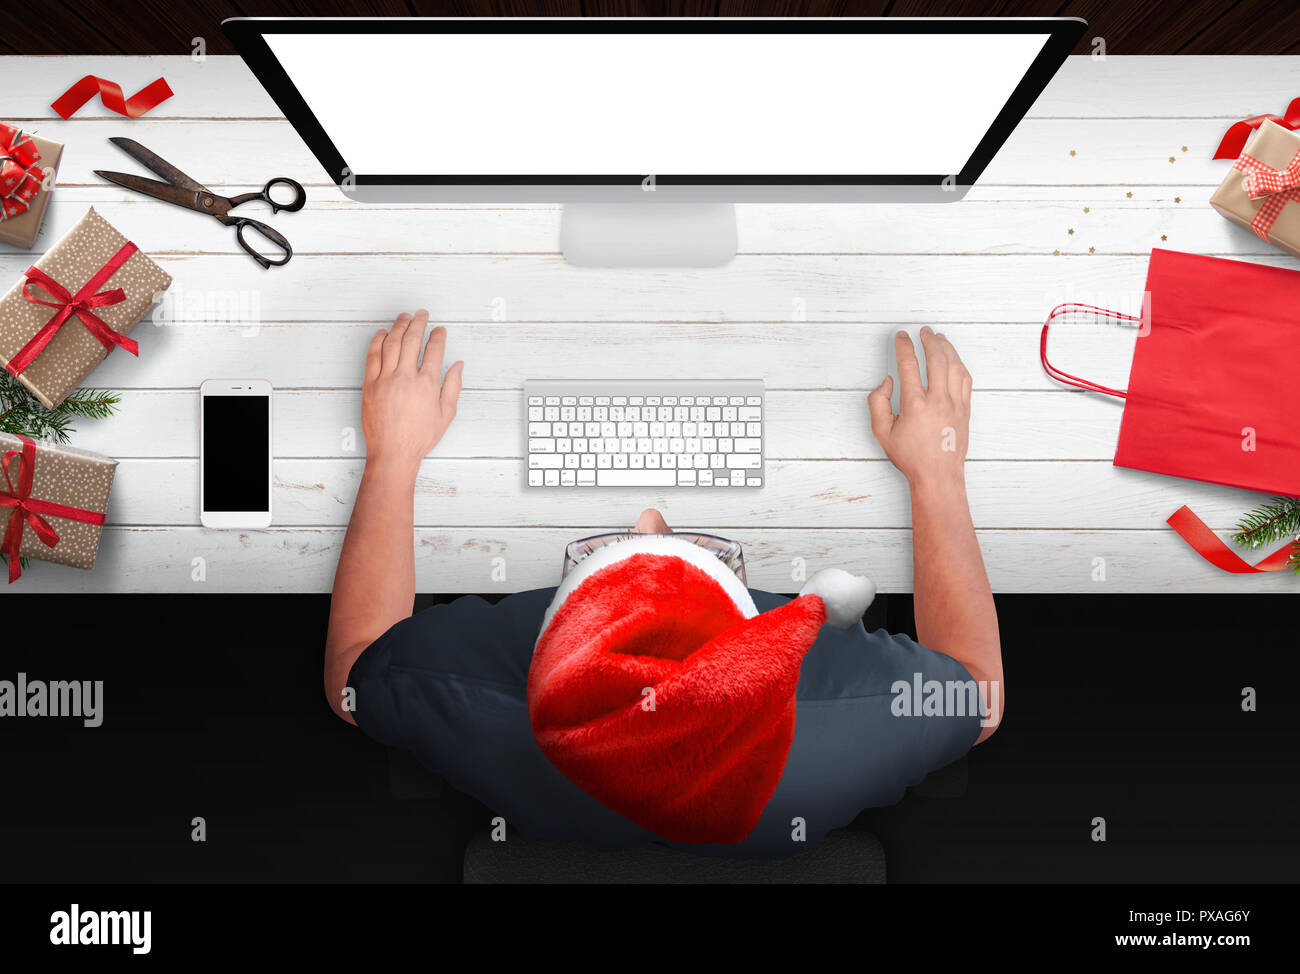 Christmas shopping from the armchair. Man buy gifts online at discounts. Bag, strips and gifts beside. Isolated computer display for mockup. Stock Photo